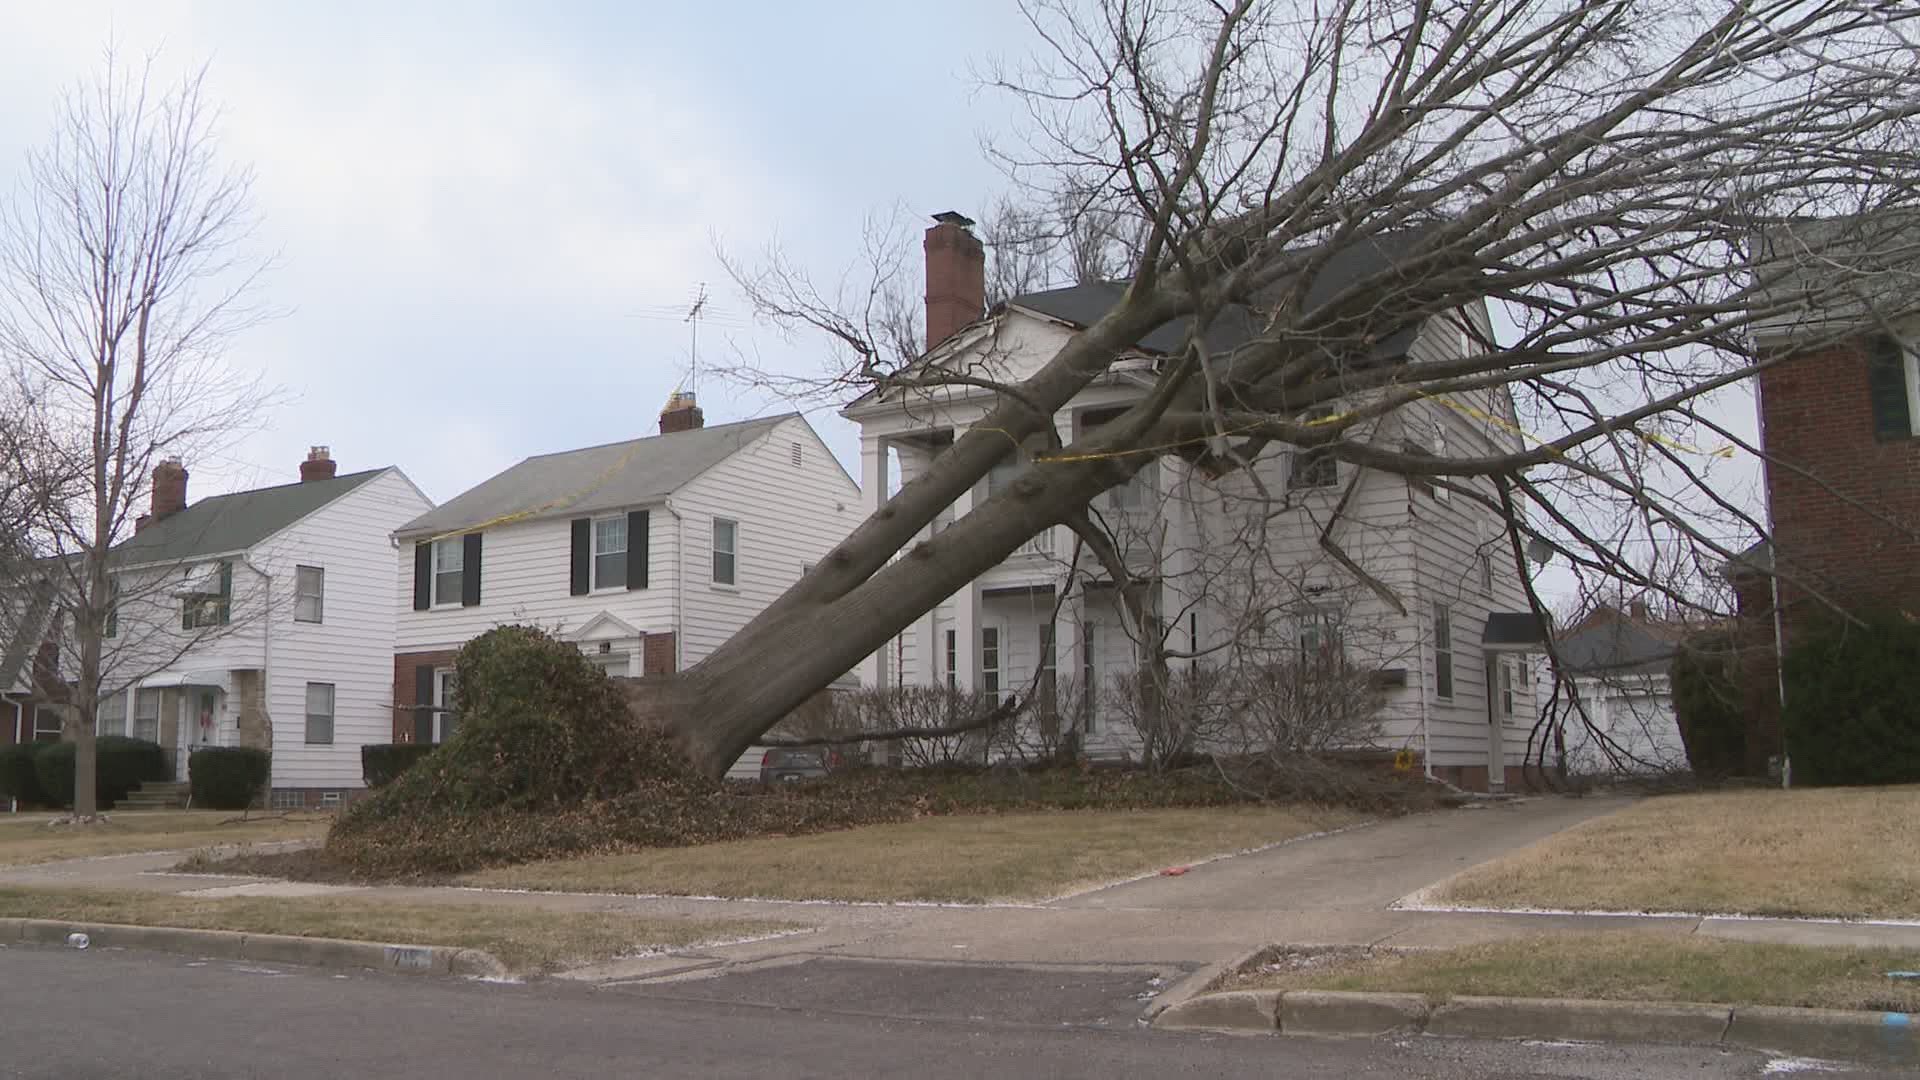 Feb. 25, 2019: Here's some of the damage our crews spotted after the relentless wind storm struck Northeast Ohio.